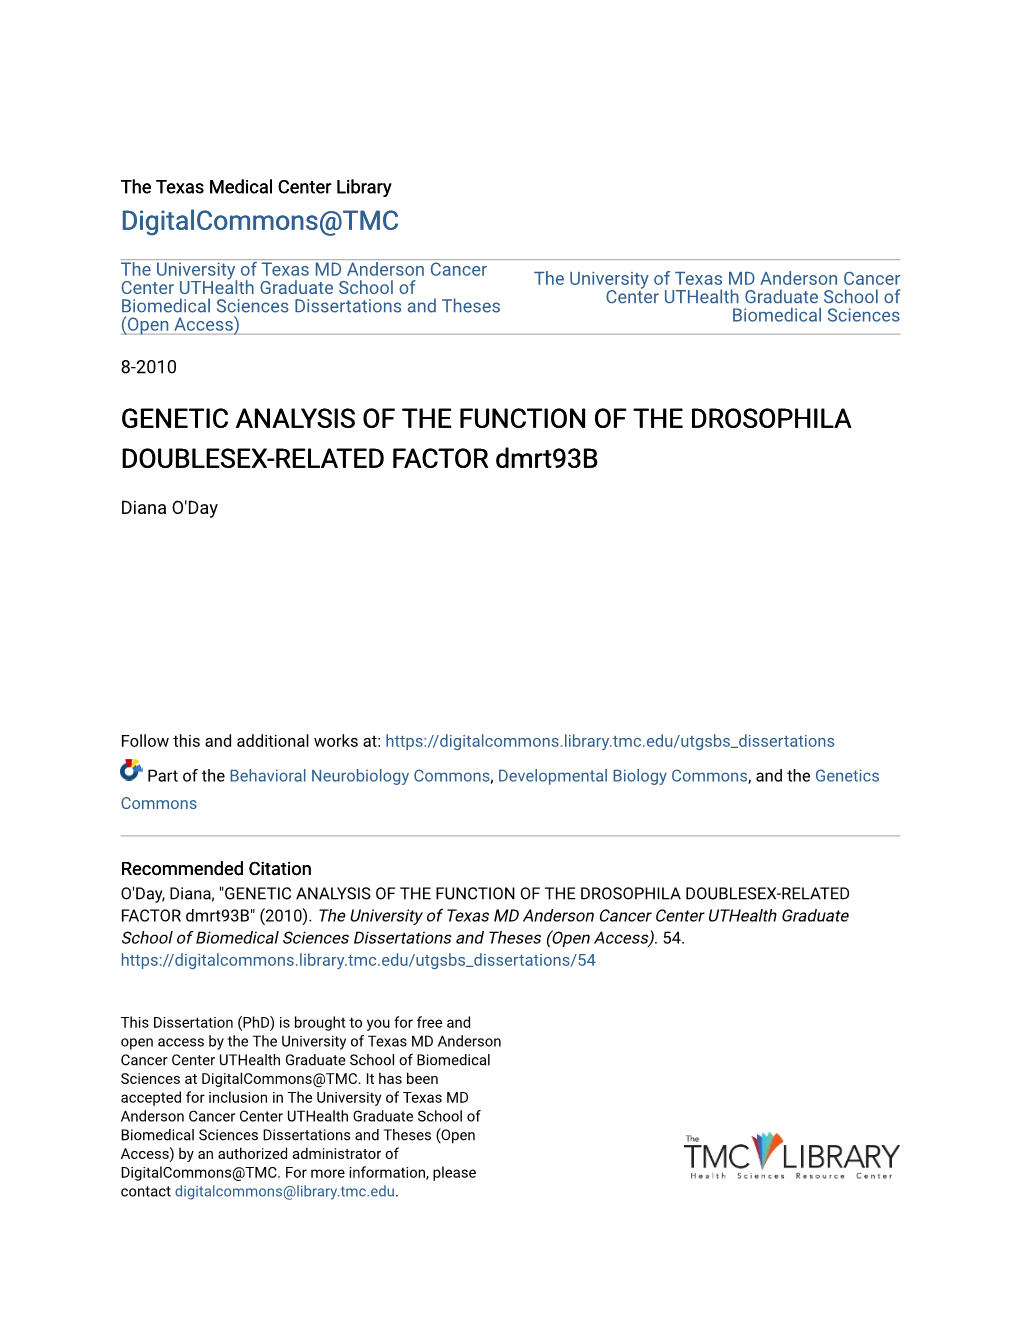 GENETIC ANALYSIS of the FUNCTION of the DROSOPHILA DOUBLESEX-RELATED FACTOR Dmrt93b